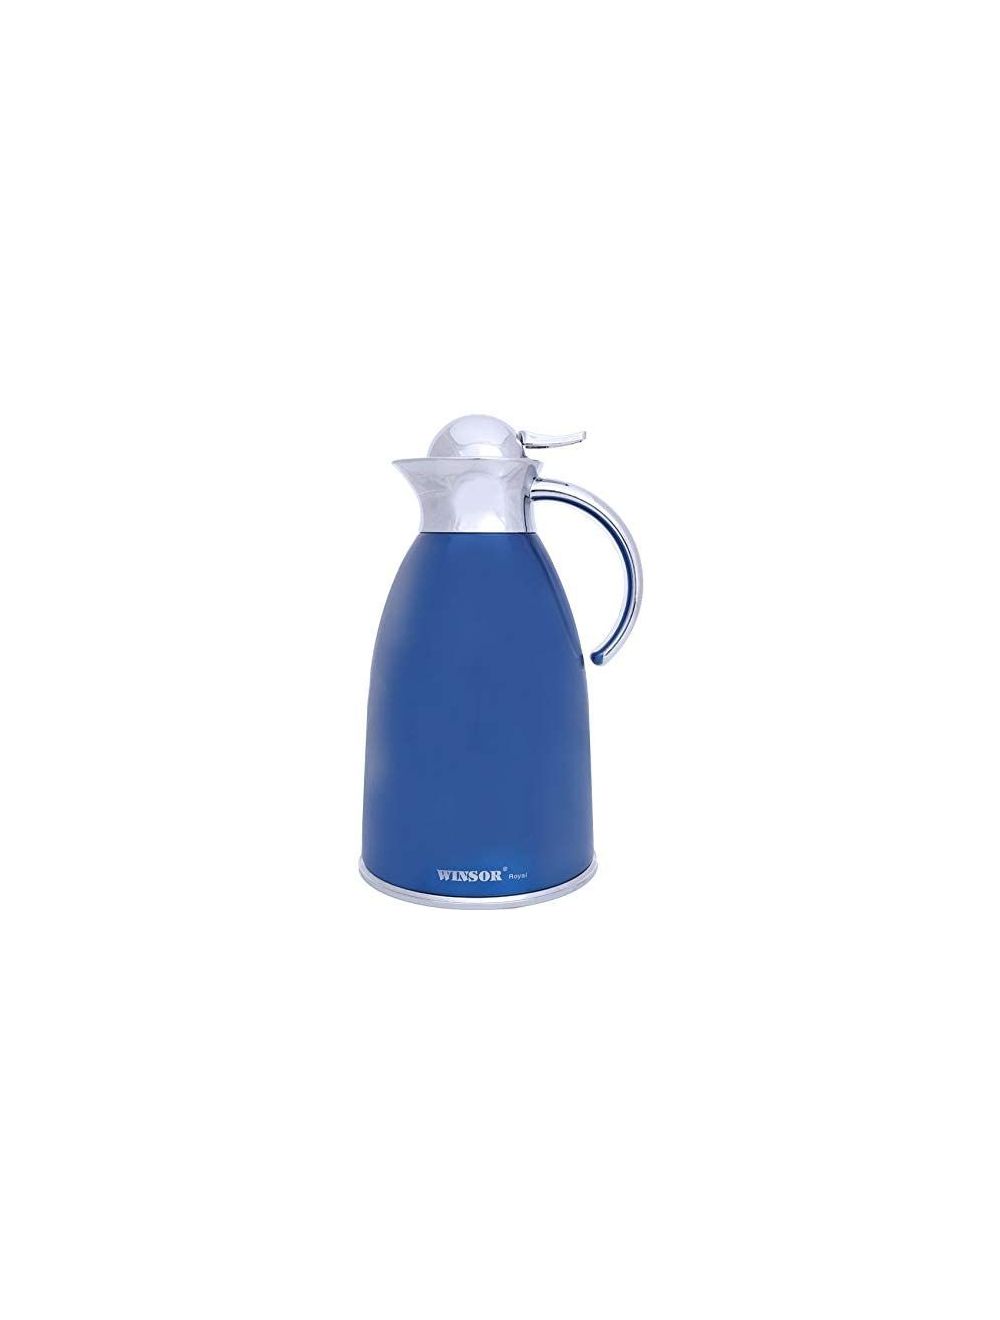 Winsor Stainless Steel Vacuum Flask 0.6 L - D.Blue-WR51231B